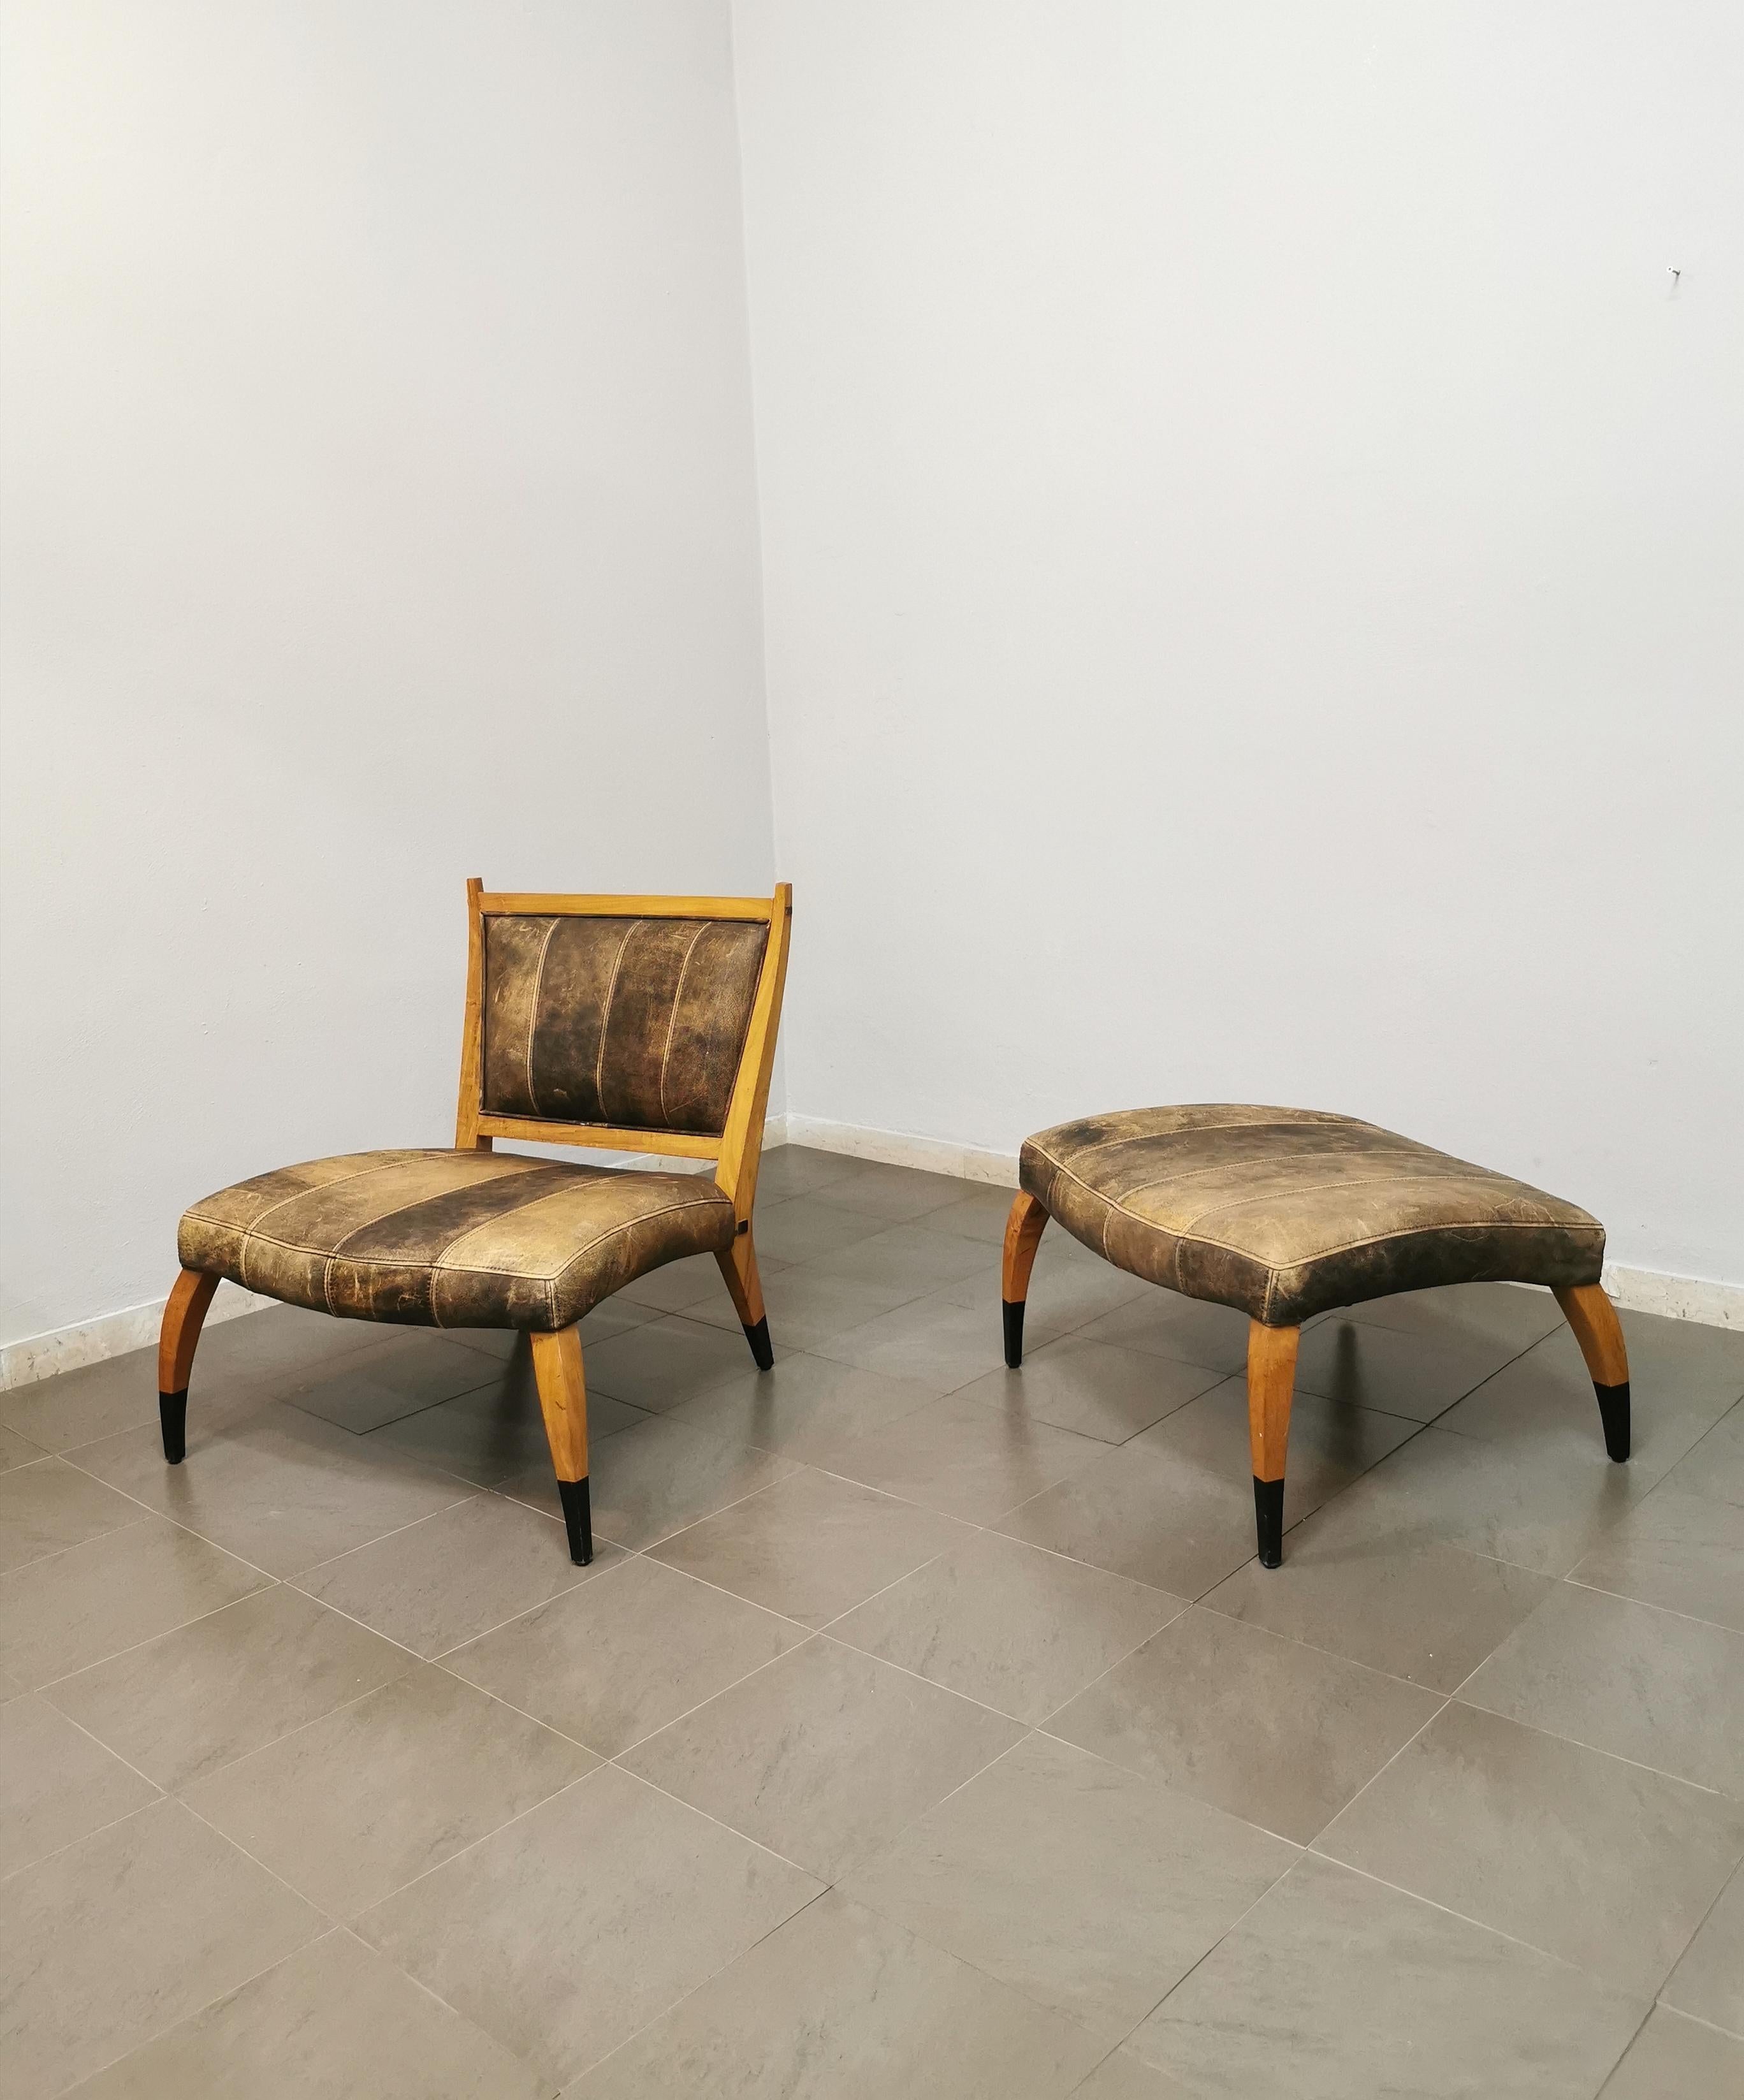 Armchair and footrest with particular shapes by an unknown designer, produced in the 1960s. The set has a curved wood structure with seat and back in aged leather.